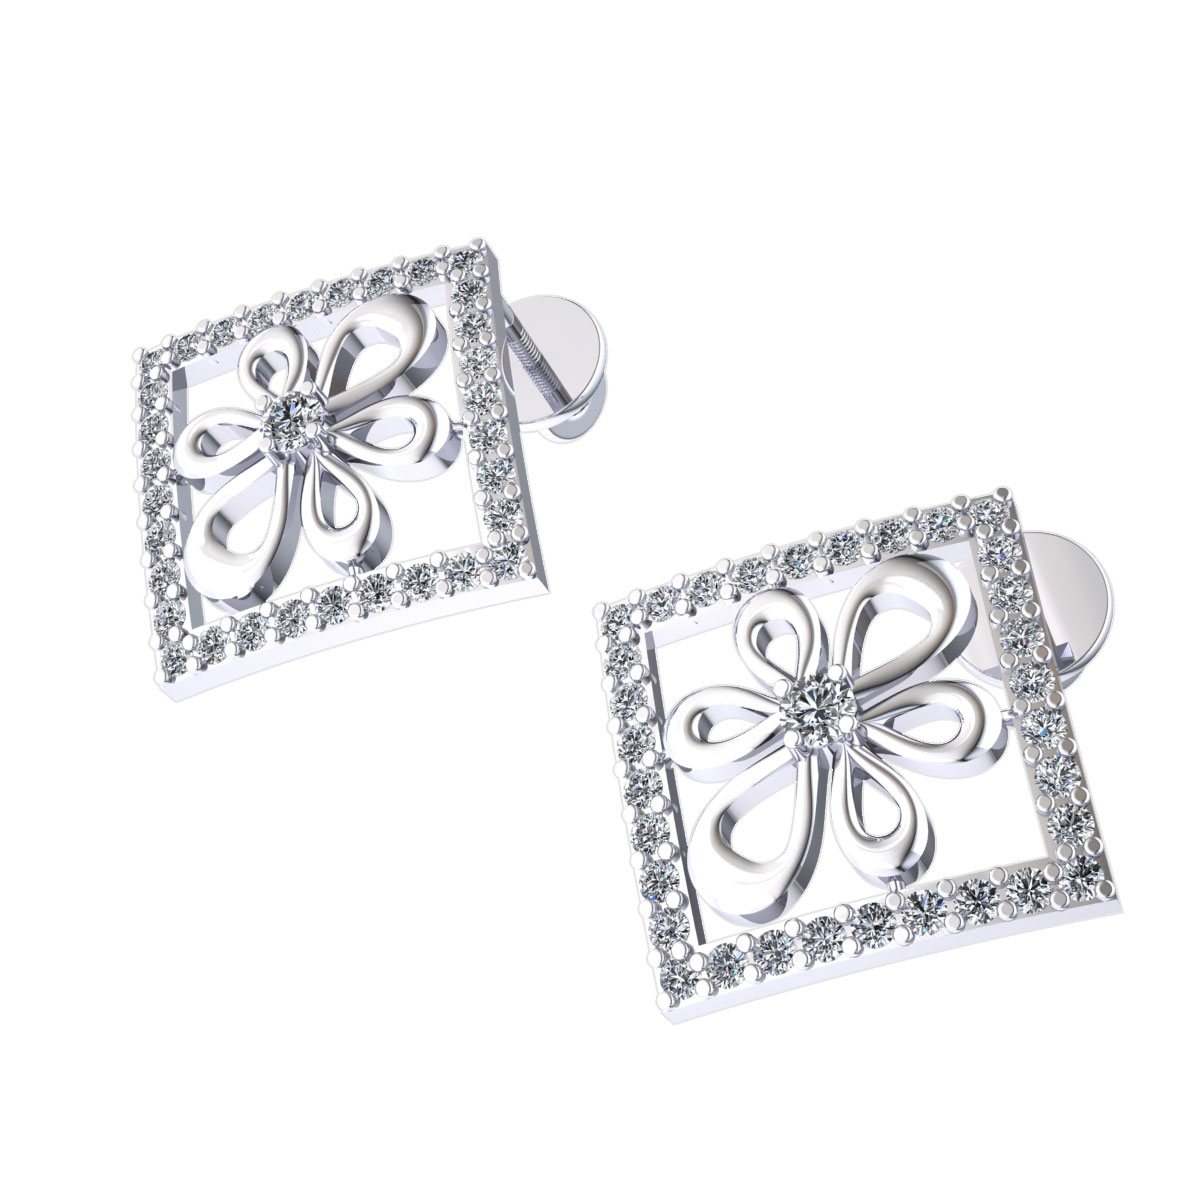 Details about   0.35ctw Genuine Round Cut Diamond Ladies Flower Square Earrings Solid 10K Gold 